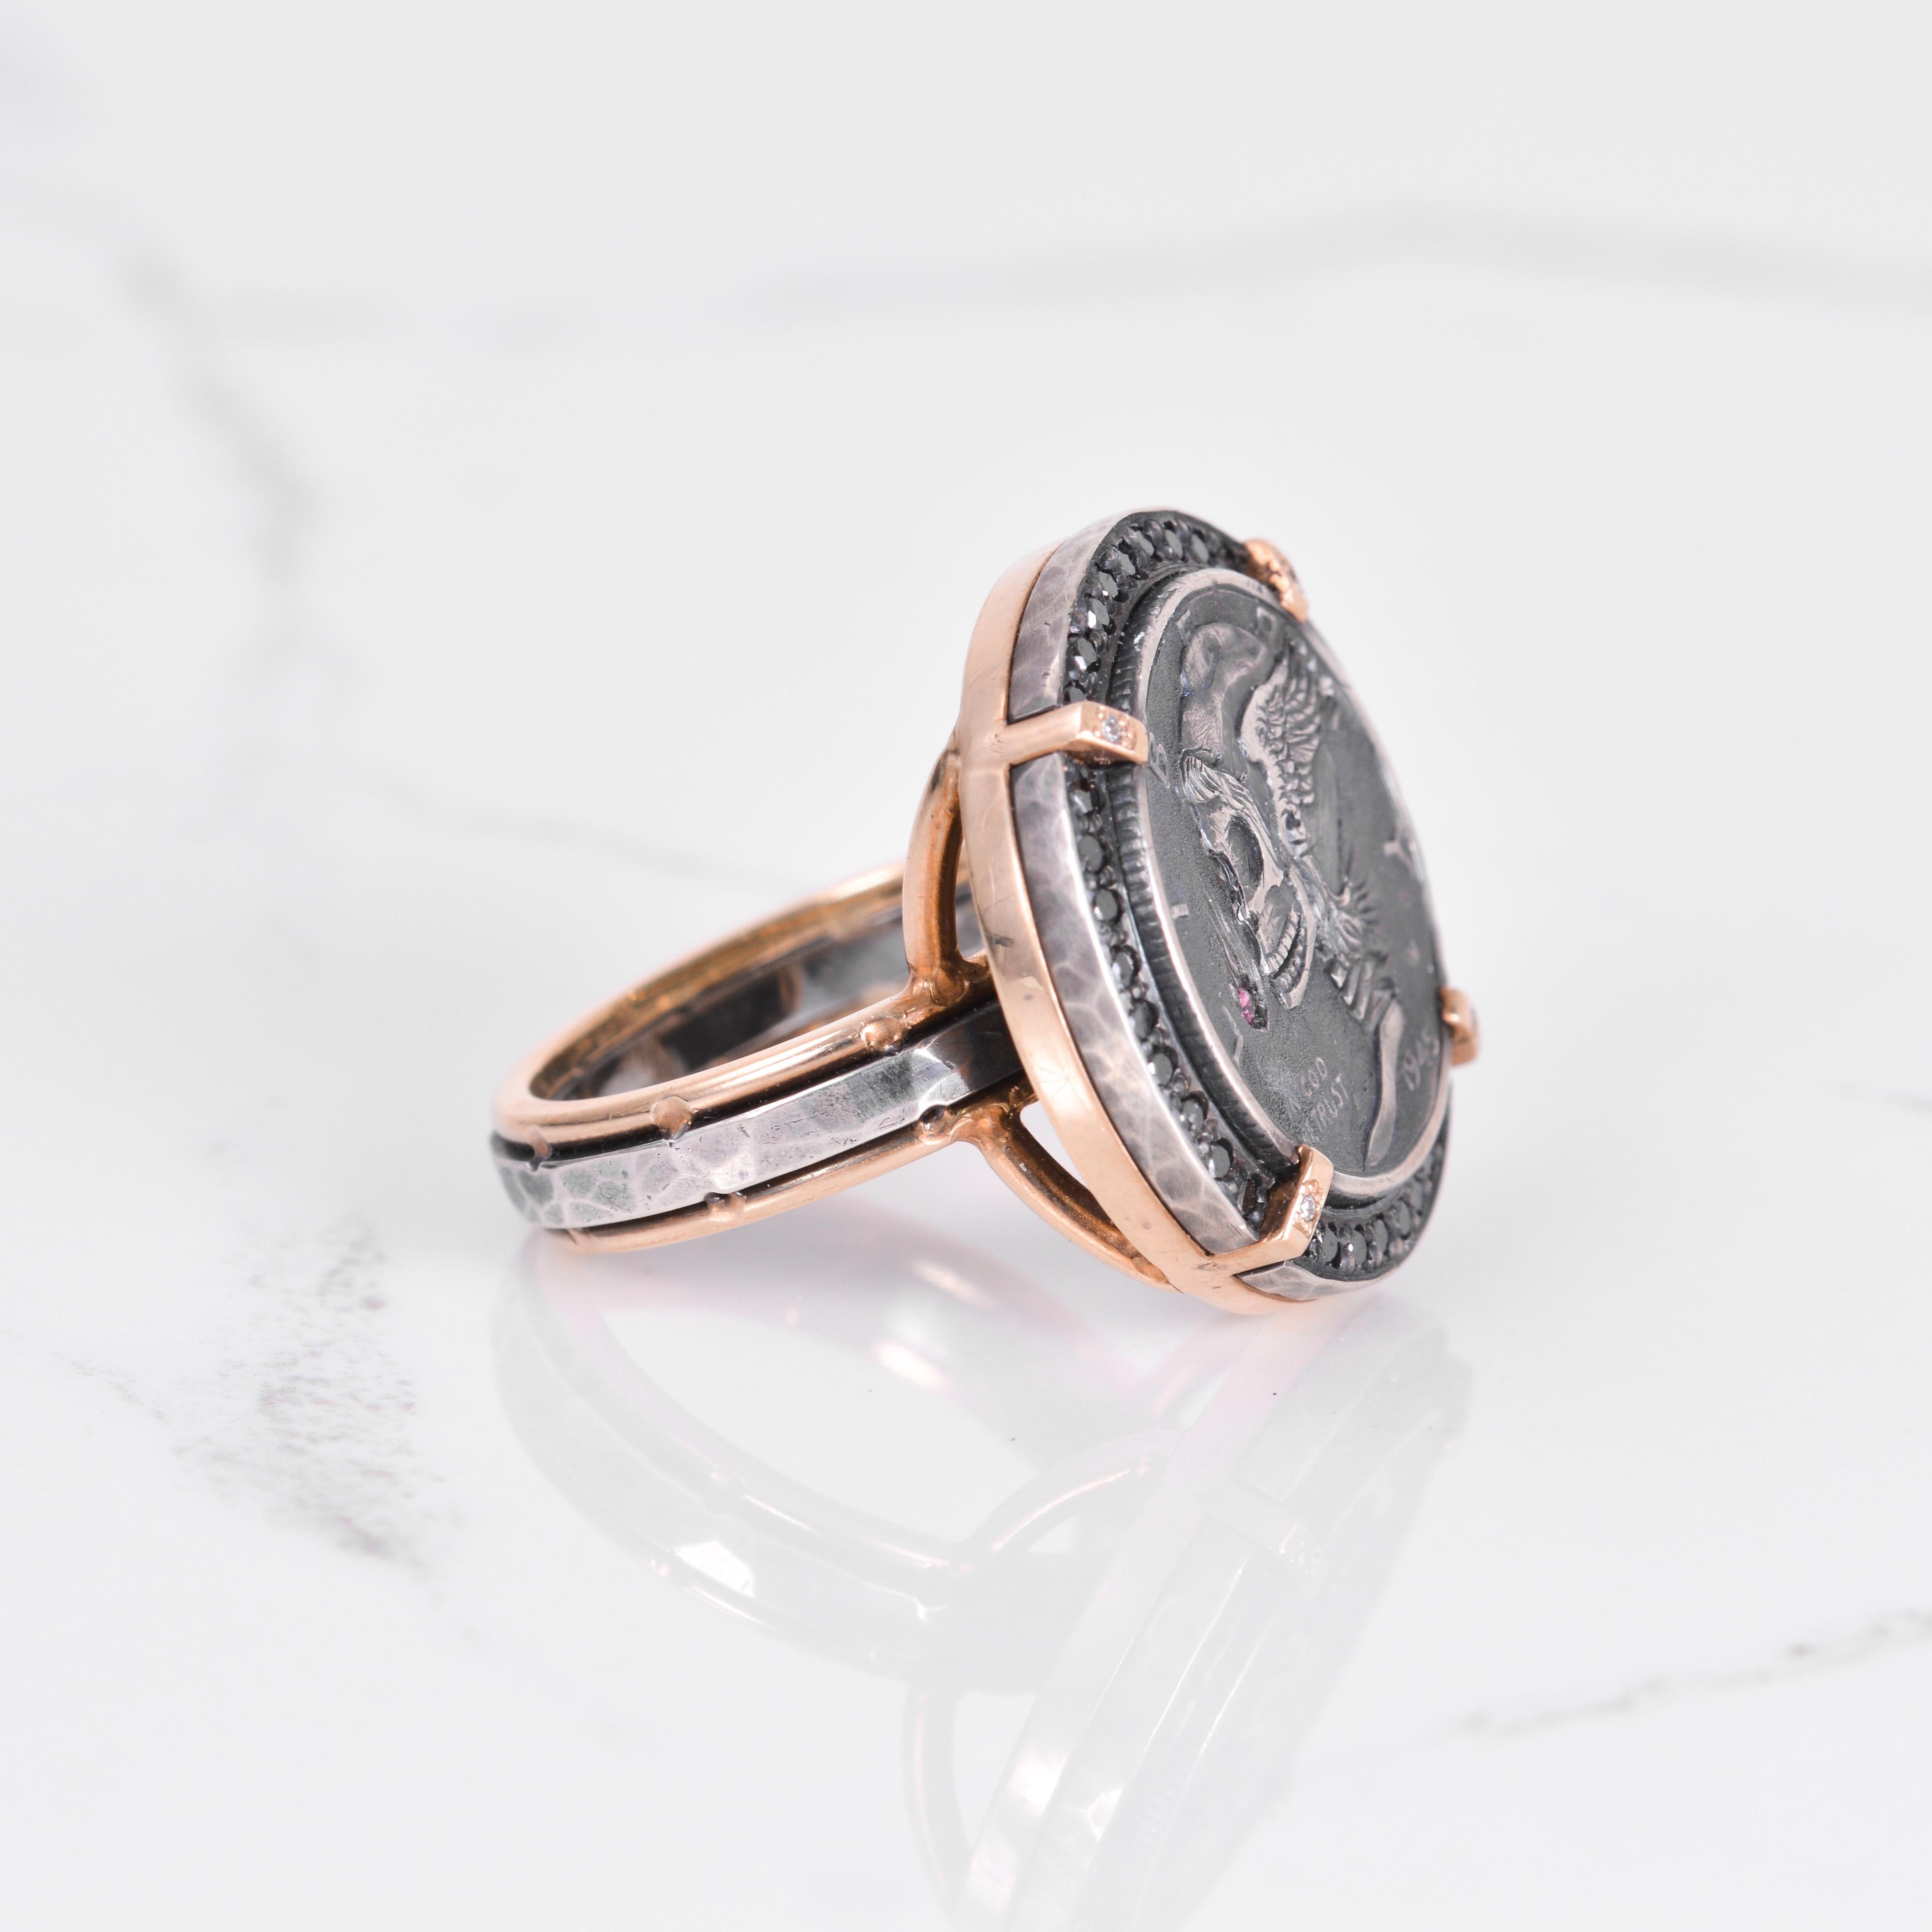 A one of a kind hand carved hobo coin with black and white diamonds, and ruby accent, all set in silver and 14k yellow gold. The dimension of the ring is 22mm in diameter. Ring size is a 7.

Additional sizes available upon request. 